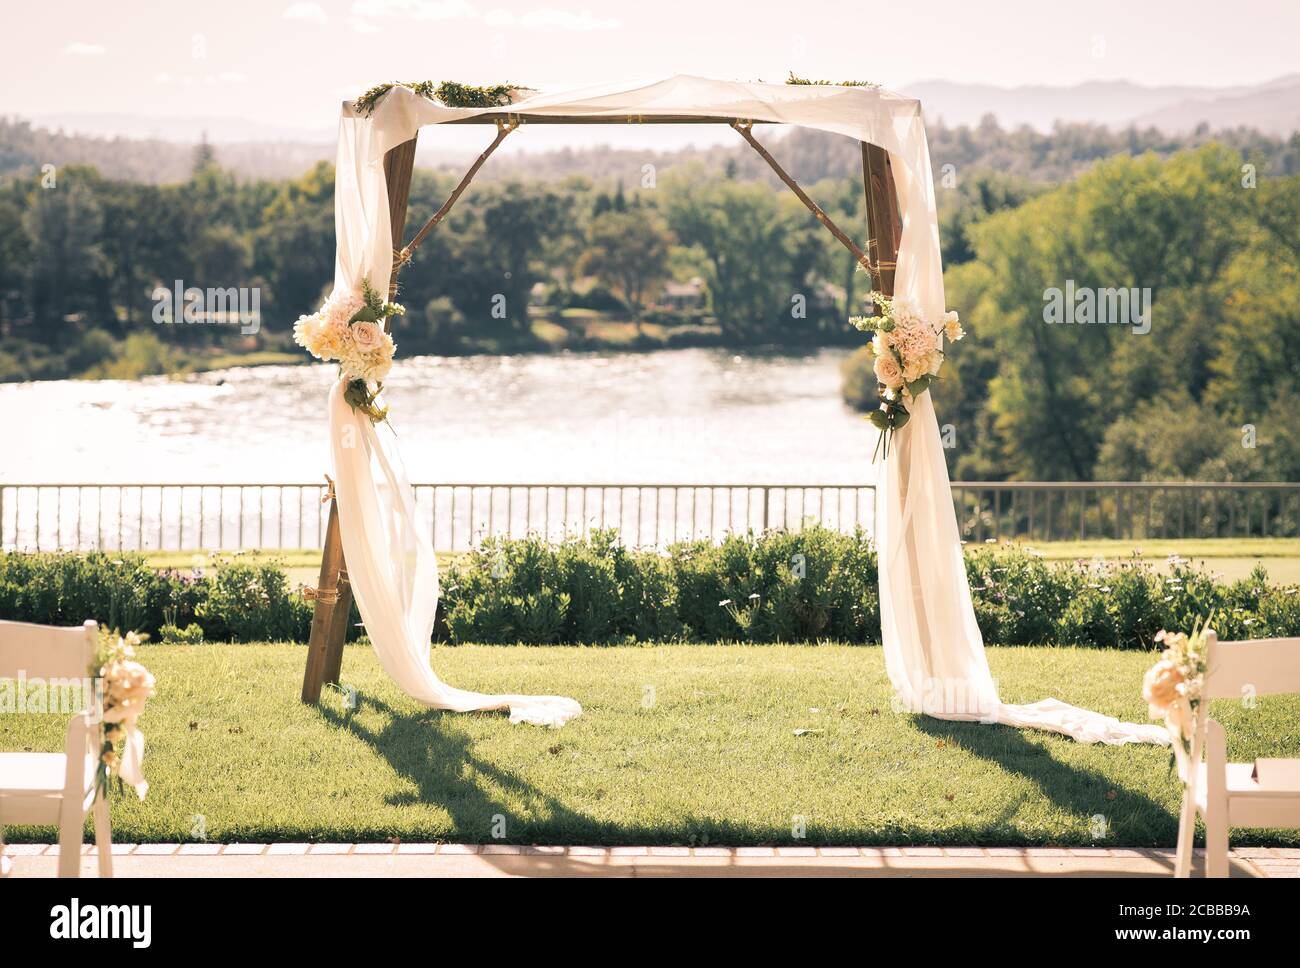 Wedding canopy overlooking the Sacramento River in Northern California Stock Photo